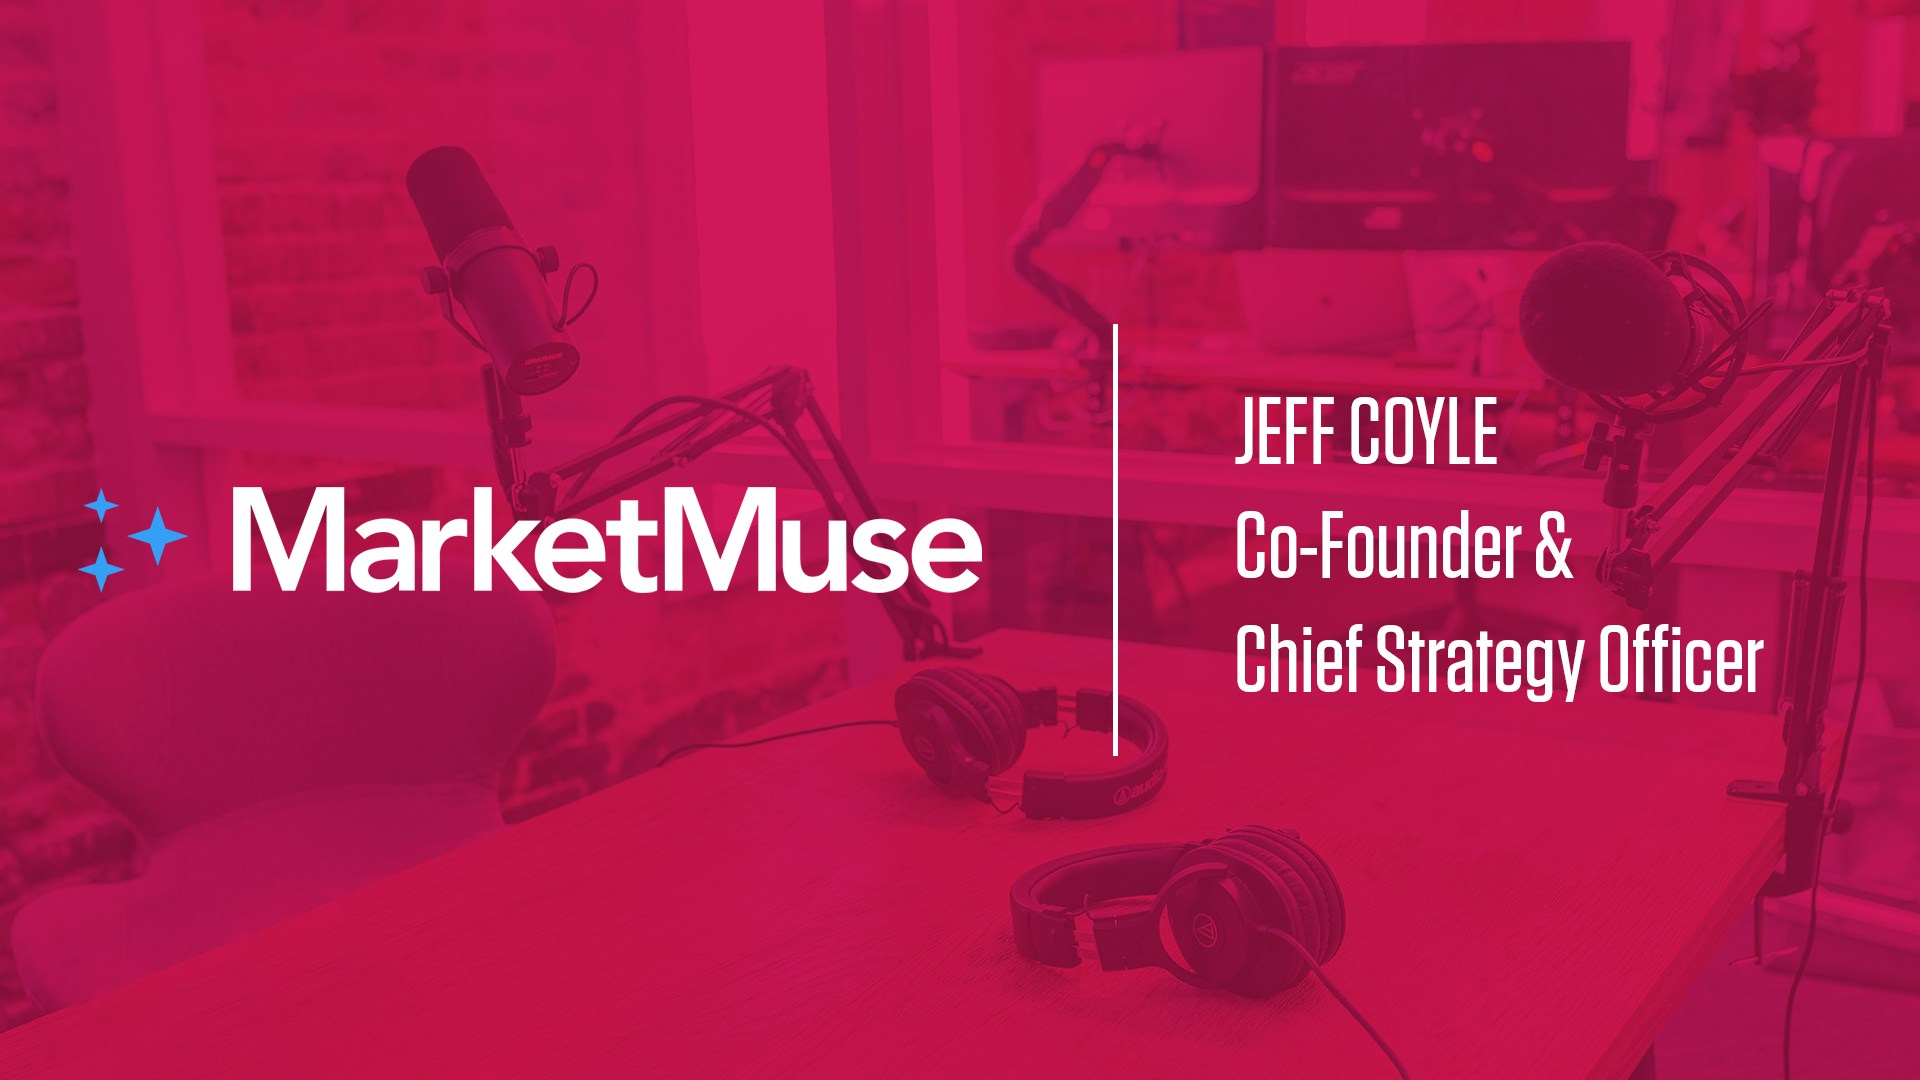 Jeff Coyle, Co-Founder and Chief Strategy Officer, at MarketMuse